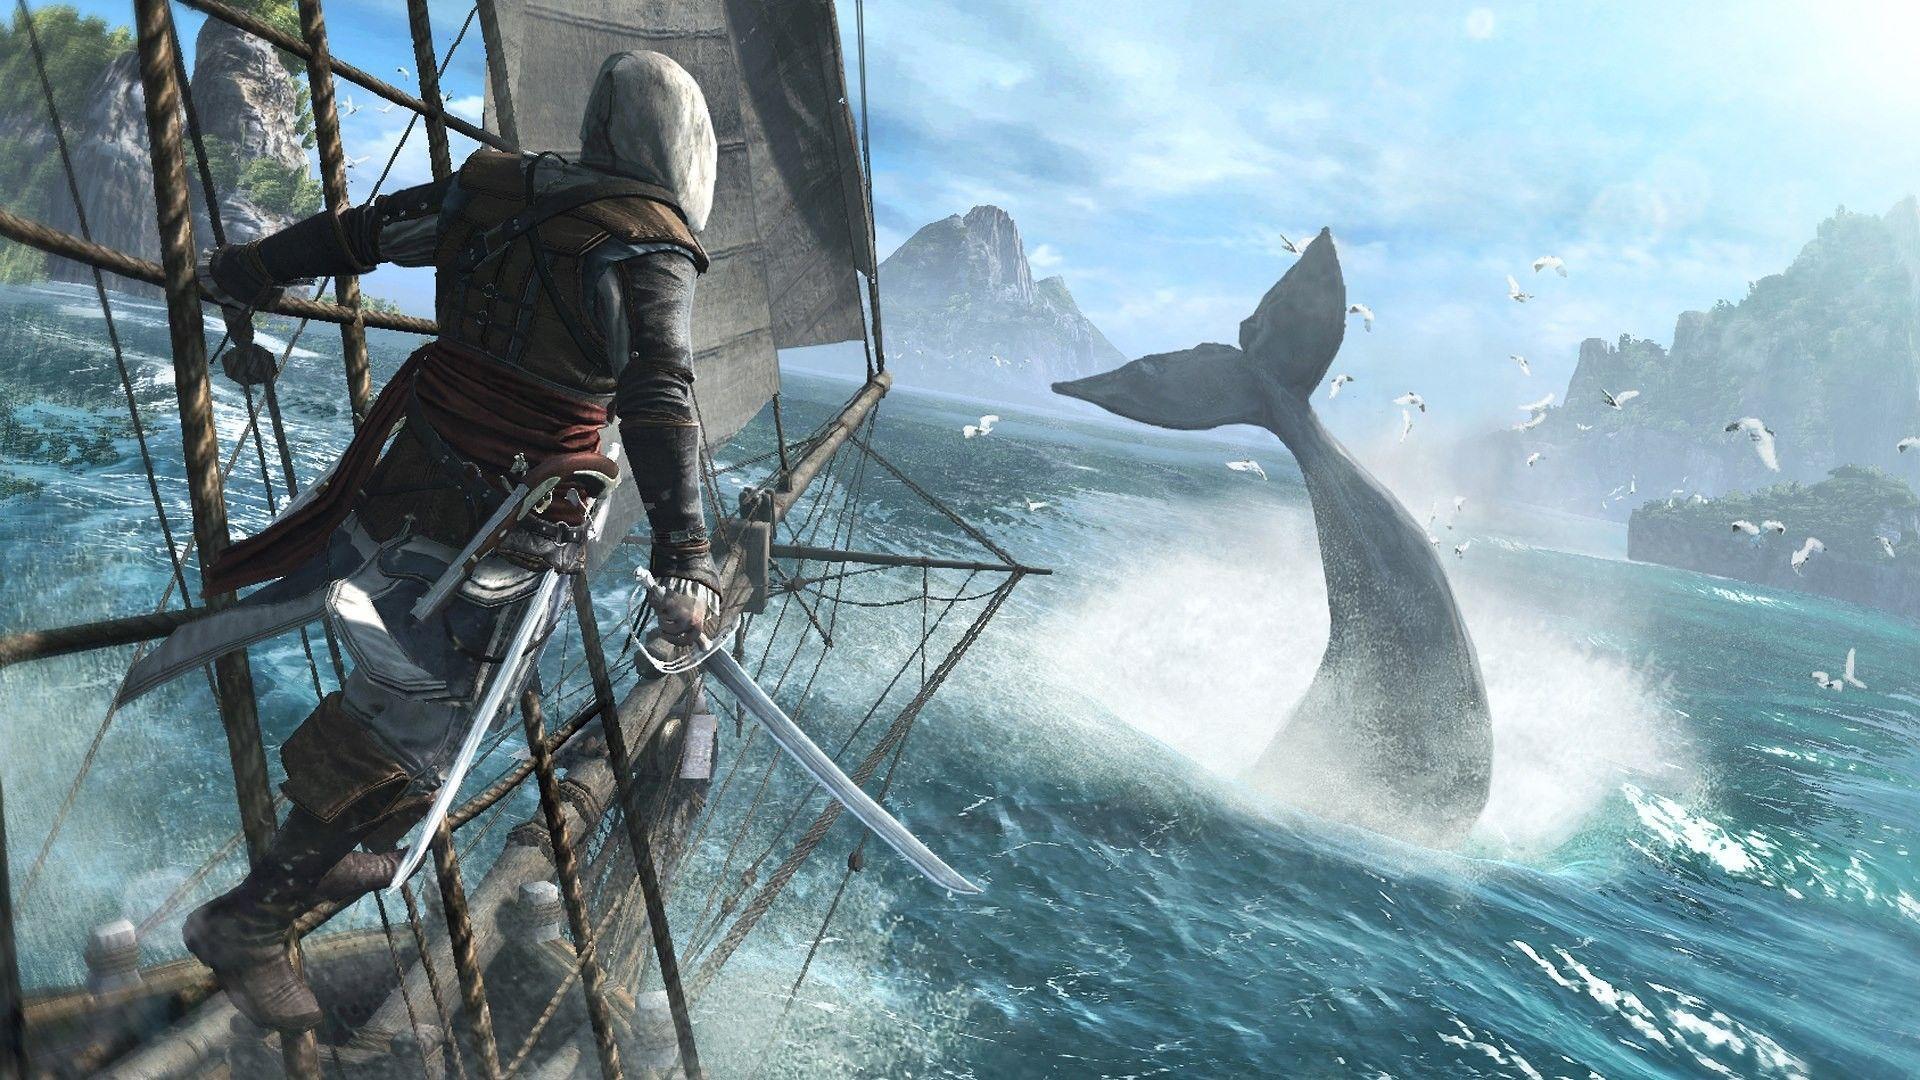 110 Assassin&Creed IV: Black Flag Wallpapers